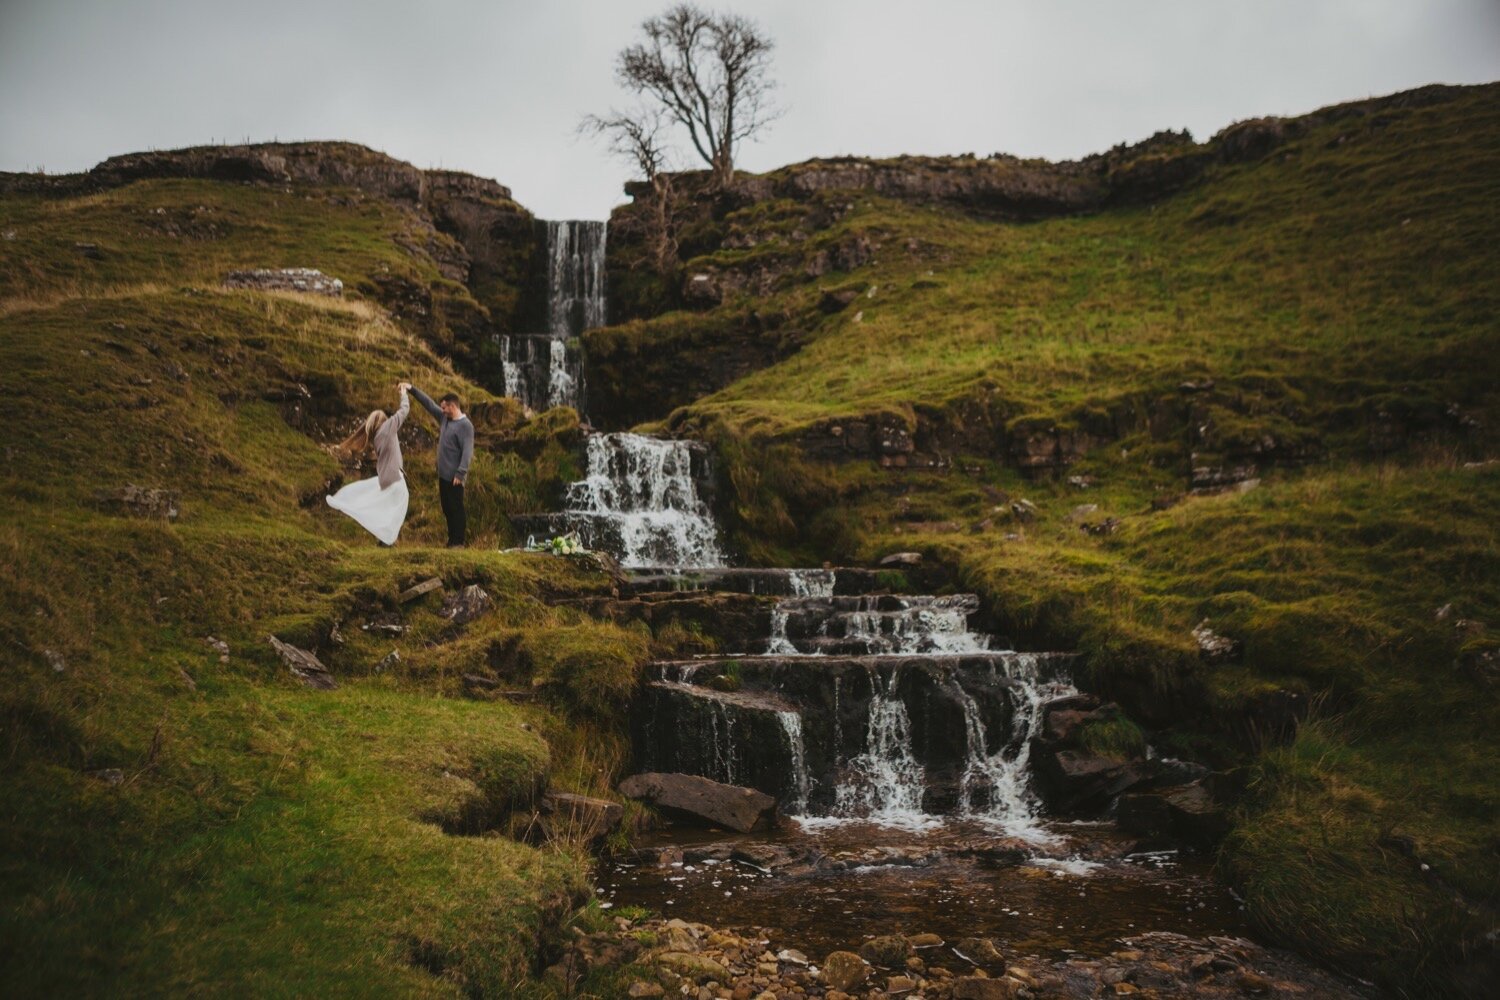 19_TWS-135__grey_dramatic_landscape_alternative_elope_alt_rock_blue_waterfall_winter_flowers_offbeat_dales_waterfalls_autumn_elopement_photography_ribbons_moody_bride_silver_wedding_yorkshire_rainy_cloudy_cosy_weather_photographer_florals_groom.jpg